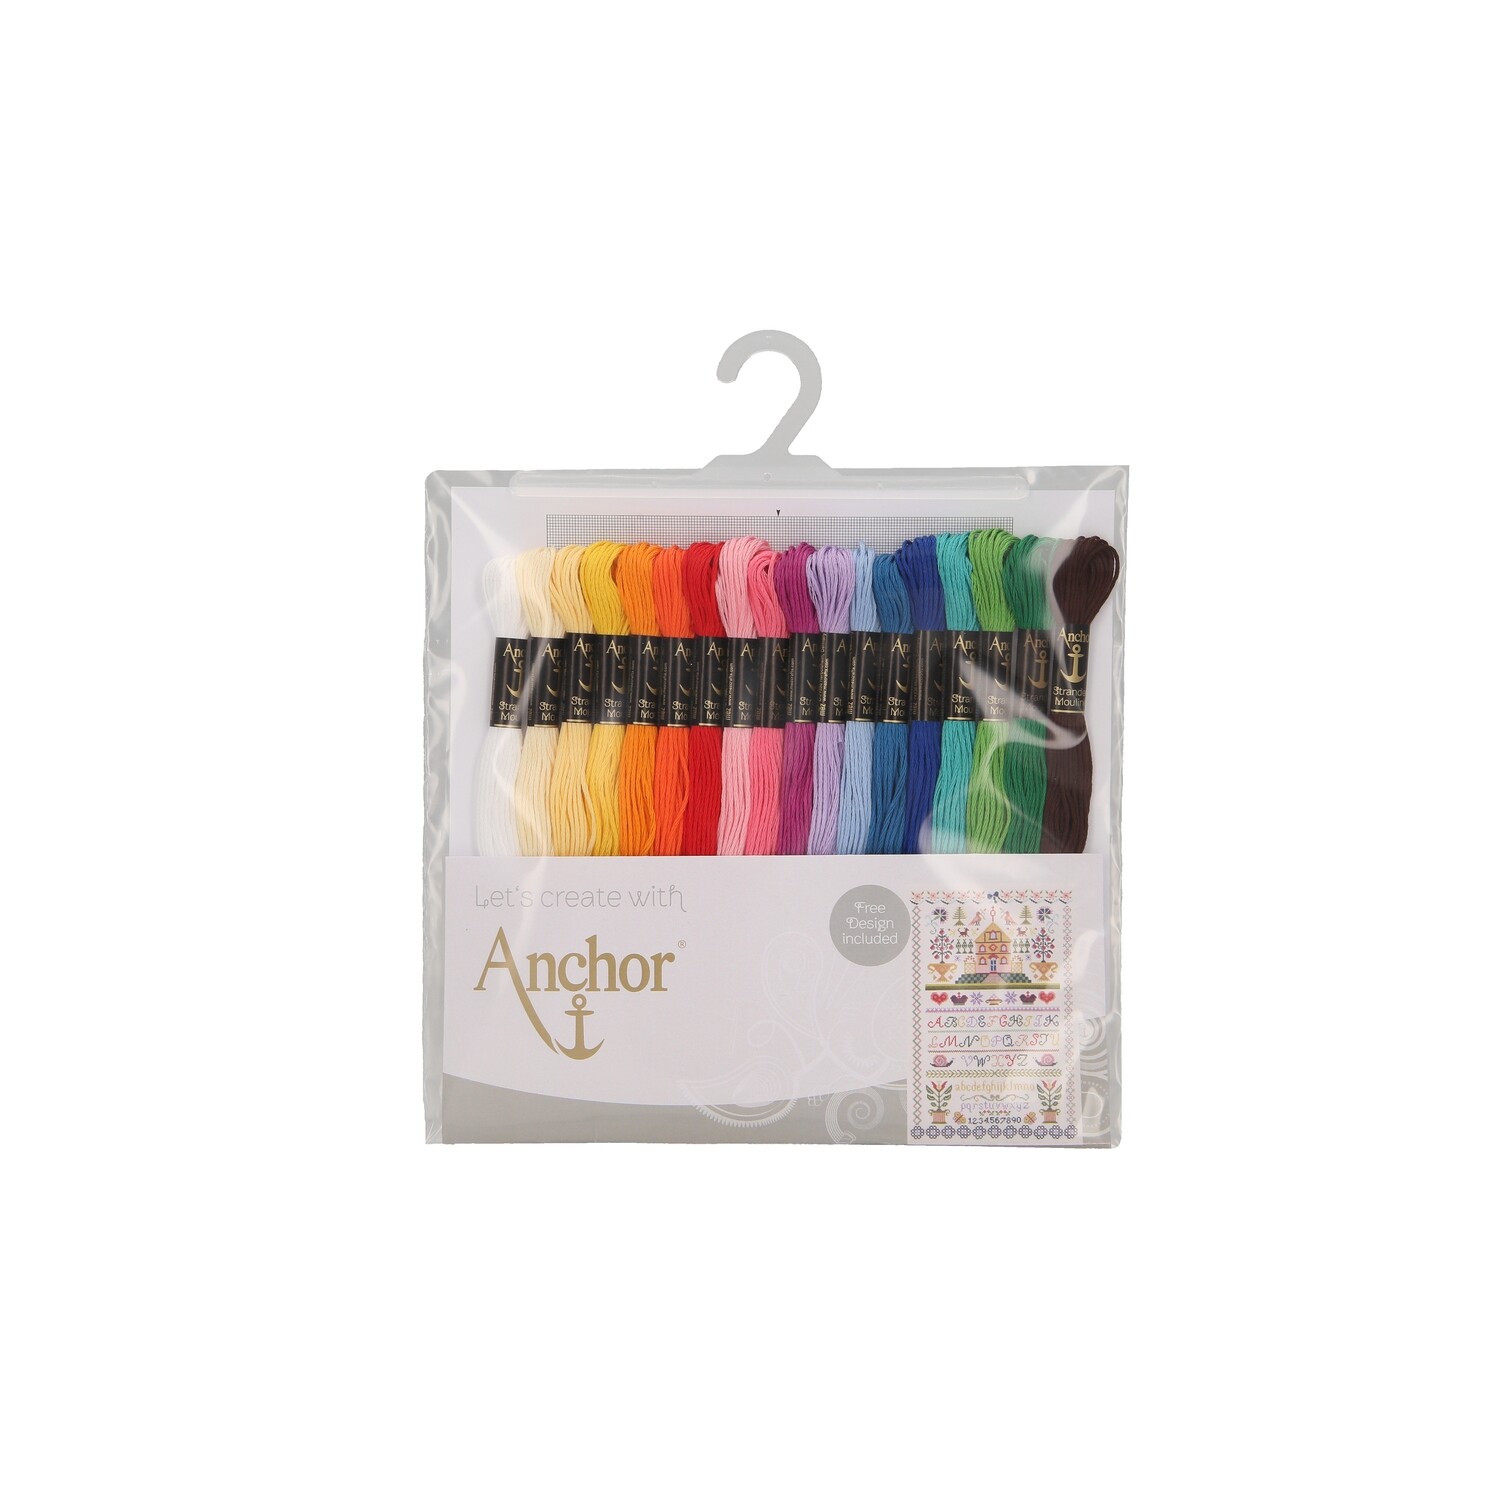 Anchor Essential Assortment - Anchor Stranded Cotton 18 Skeins